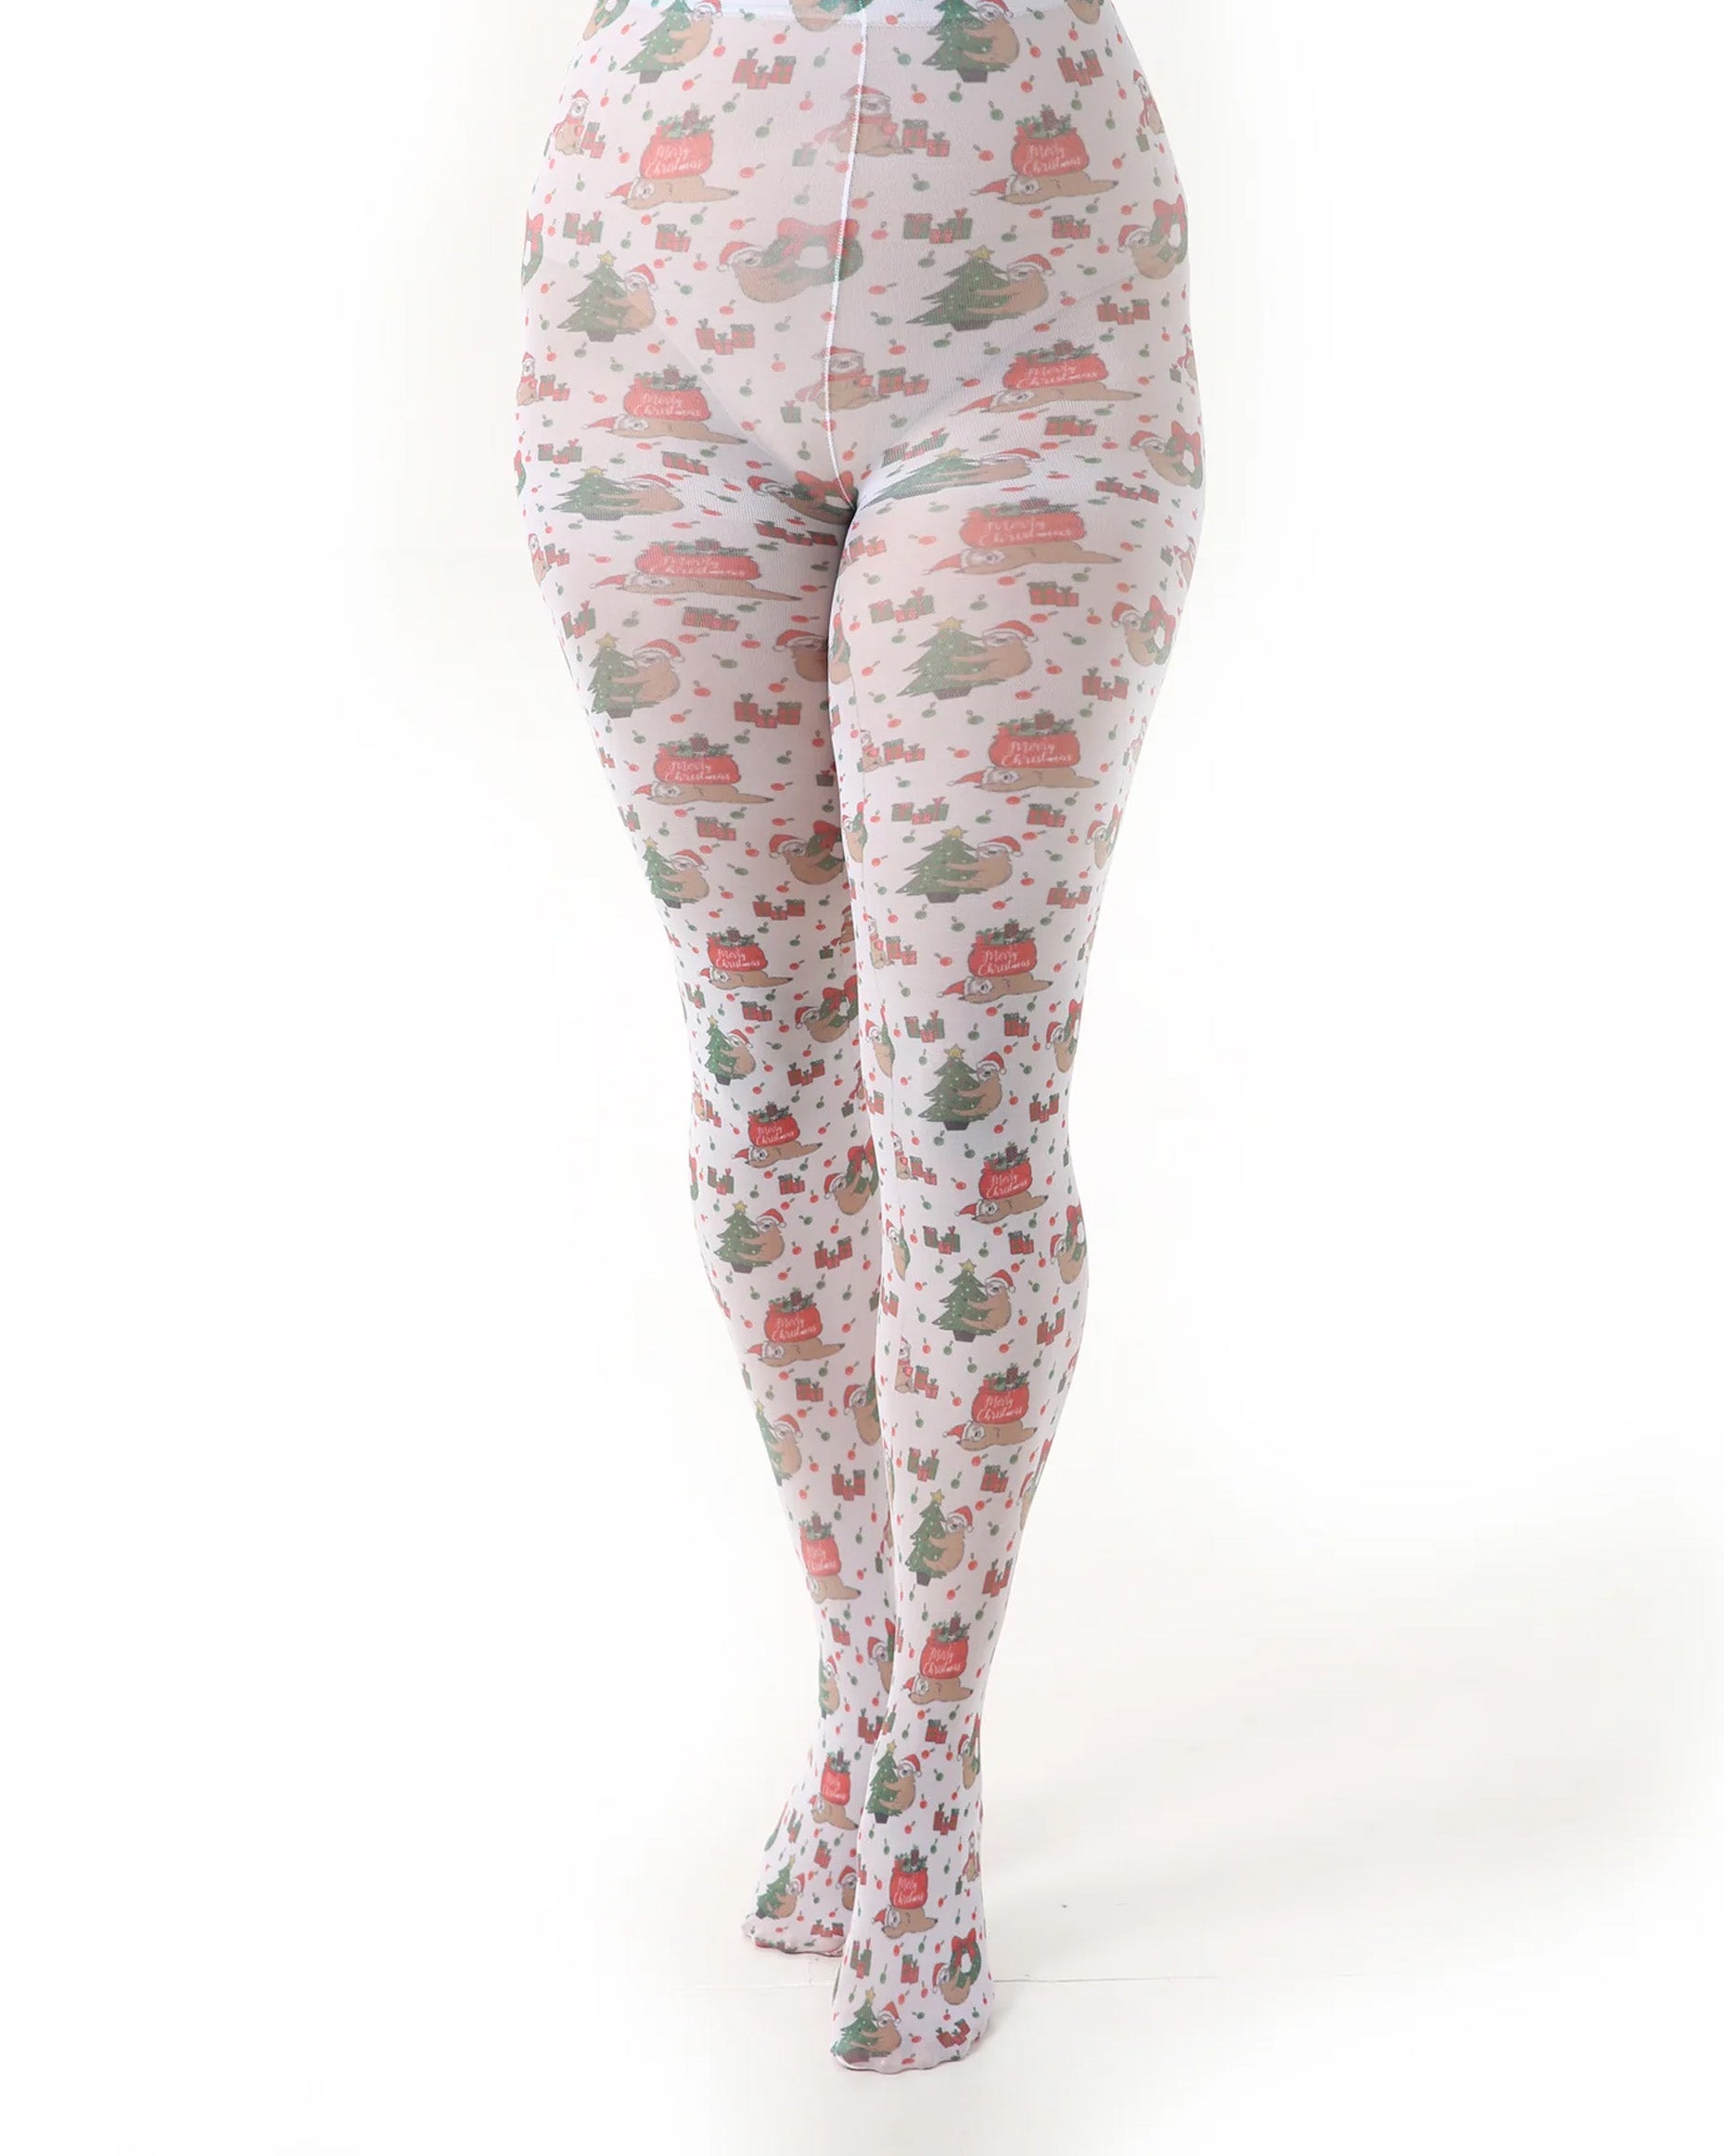 Pamela Mann Christams Sloth Tights - Novelty Christams tights with sloths and Xmas trees and wreaths printed pattern.